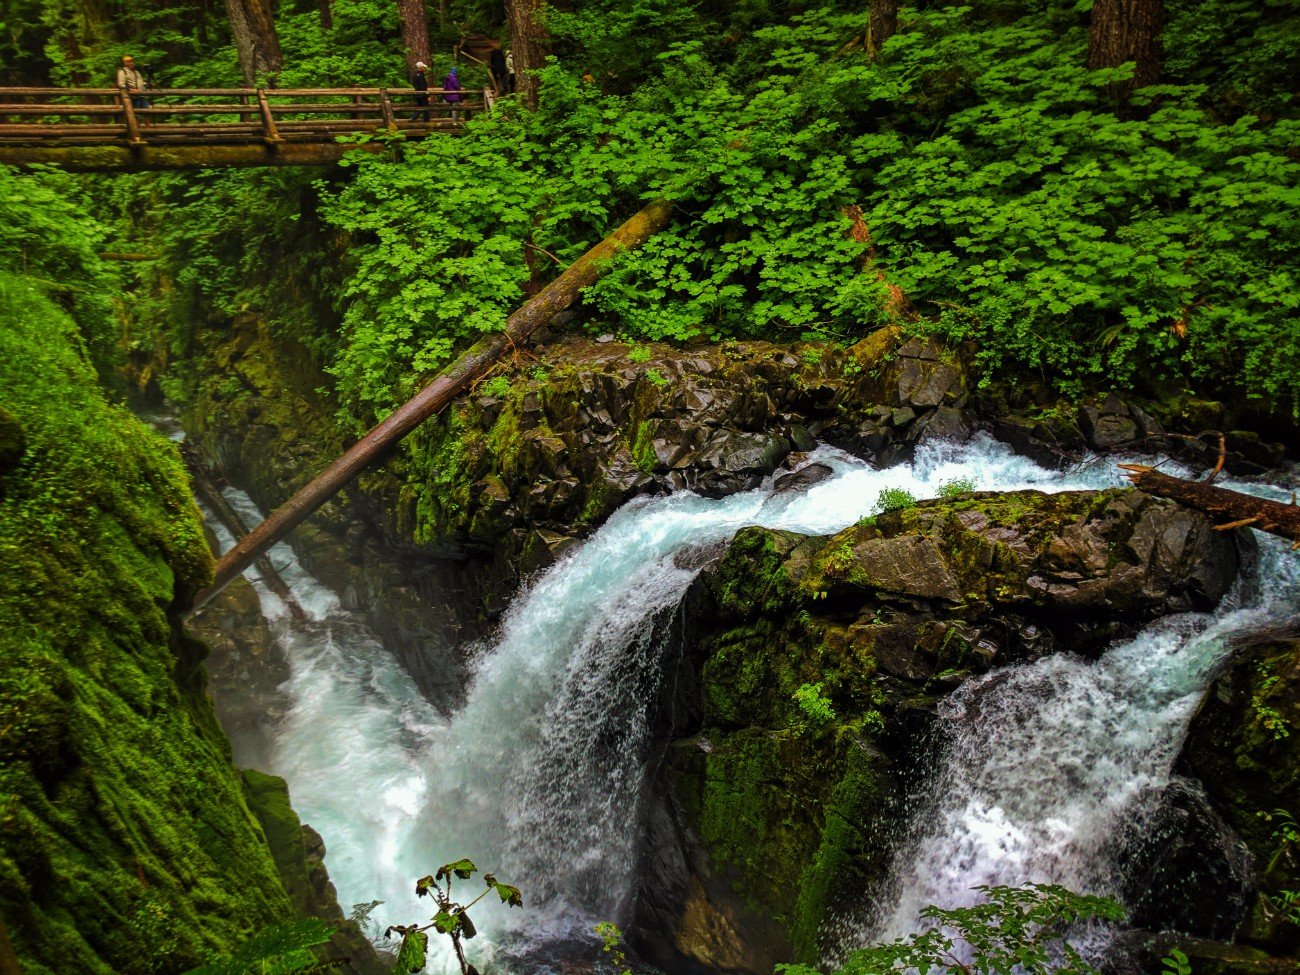 Mossy gorge and waterfalls in Rainforest Sol Duc Falls Olympic National Park 9